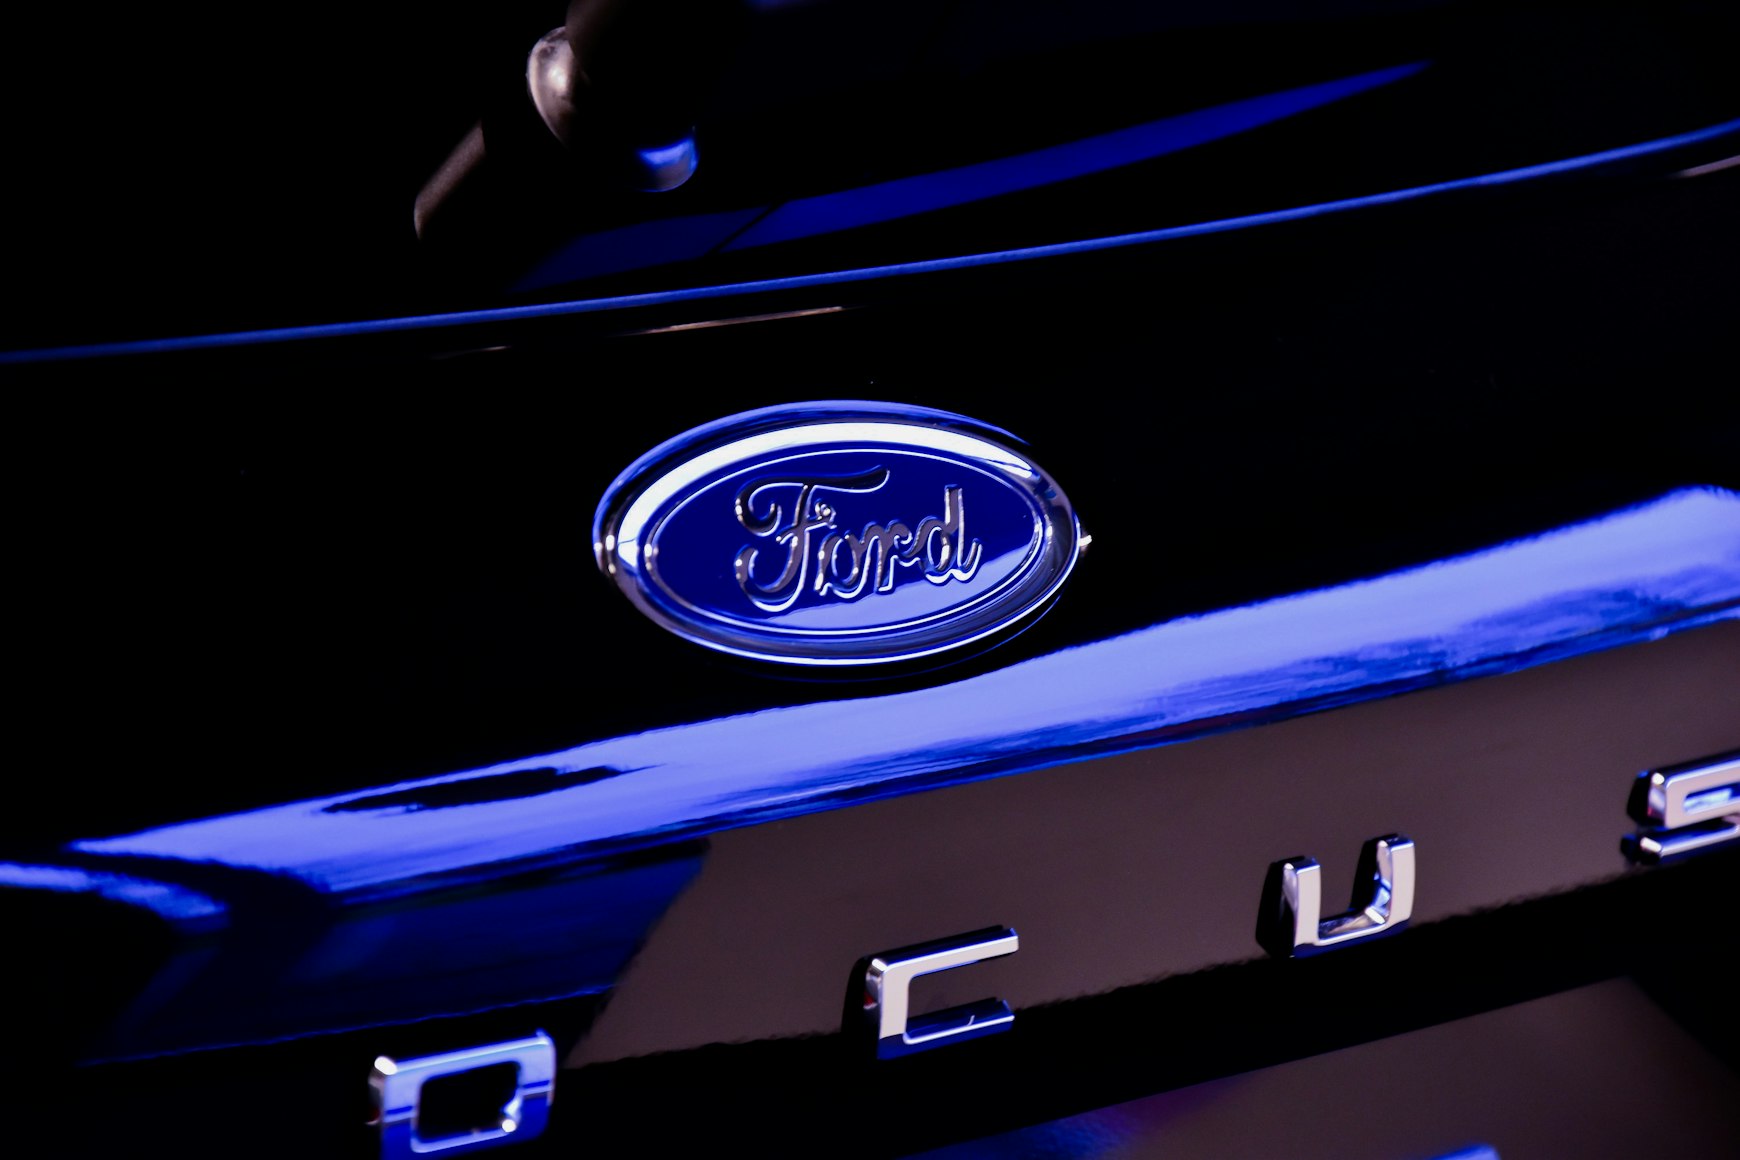 Blue Ford logo zoomed in on a Ford Focus sedan.